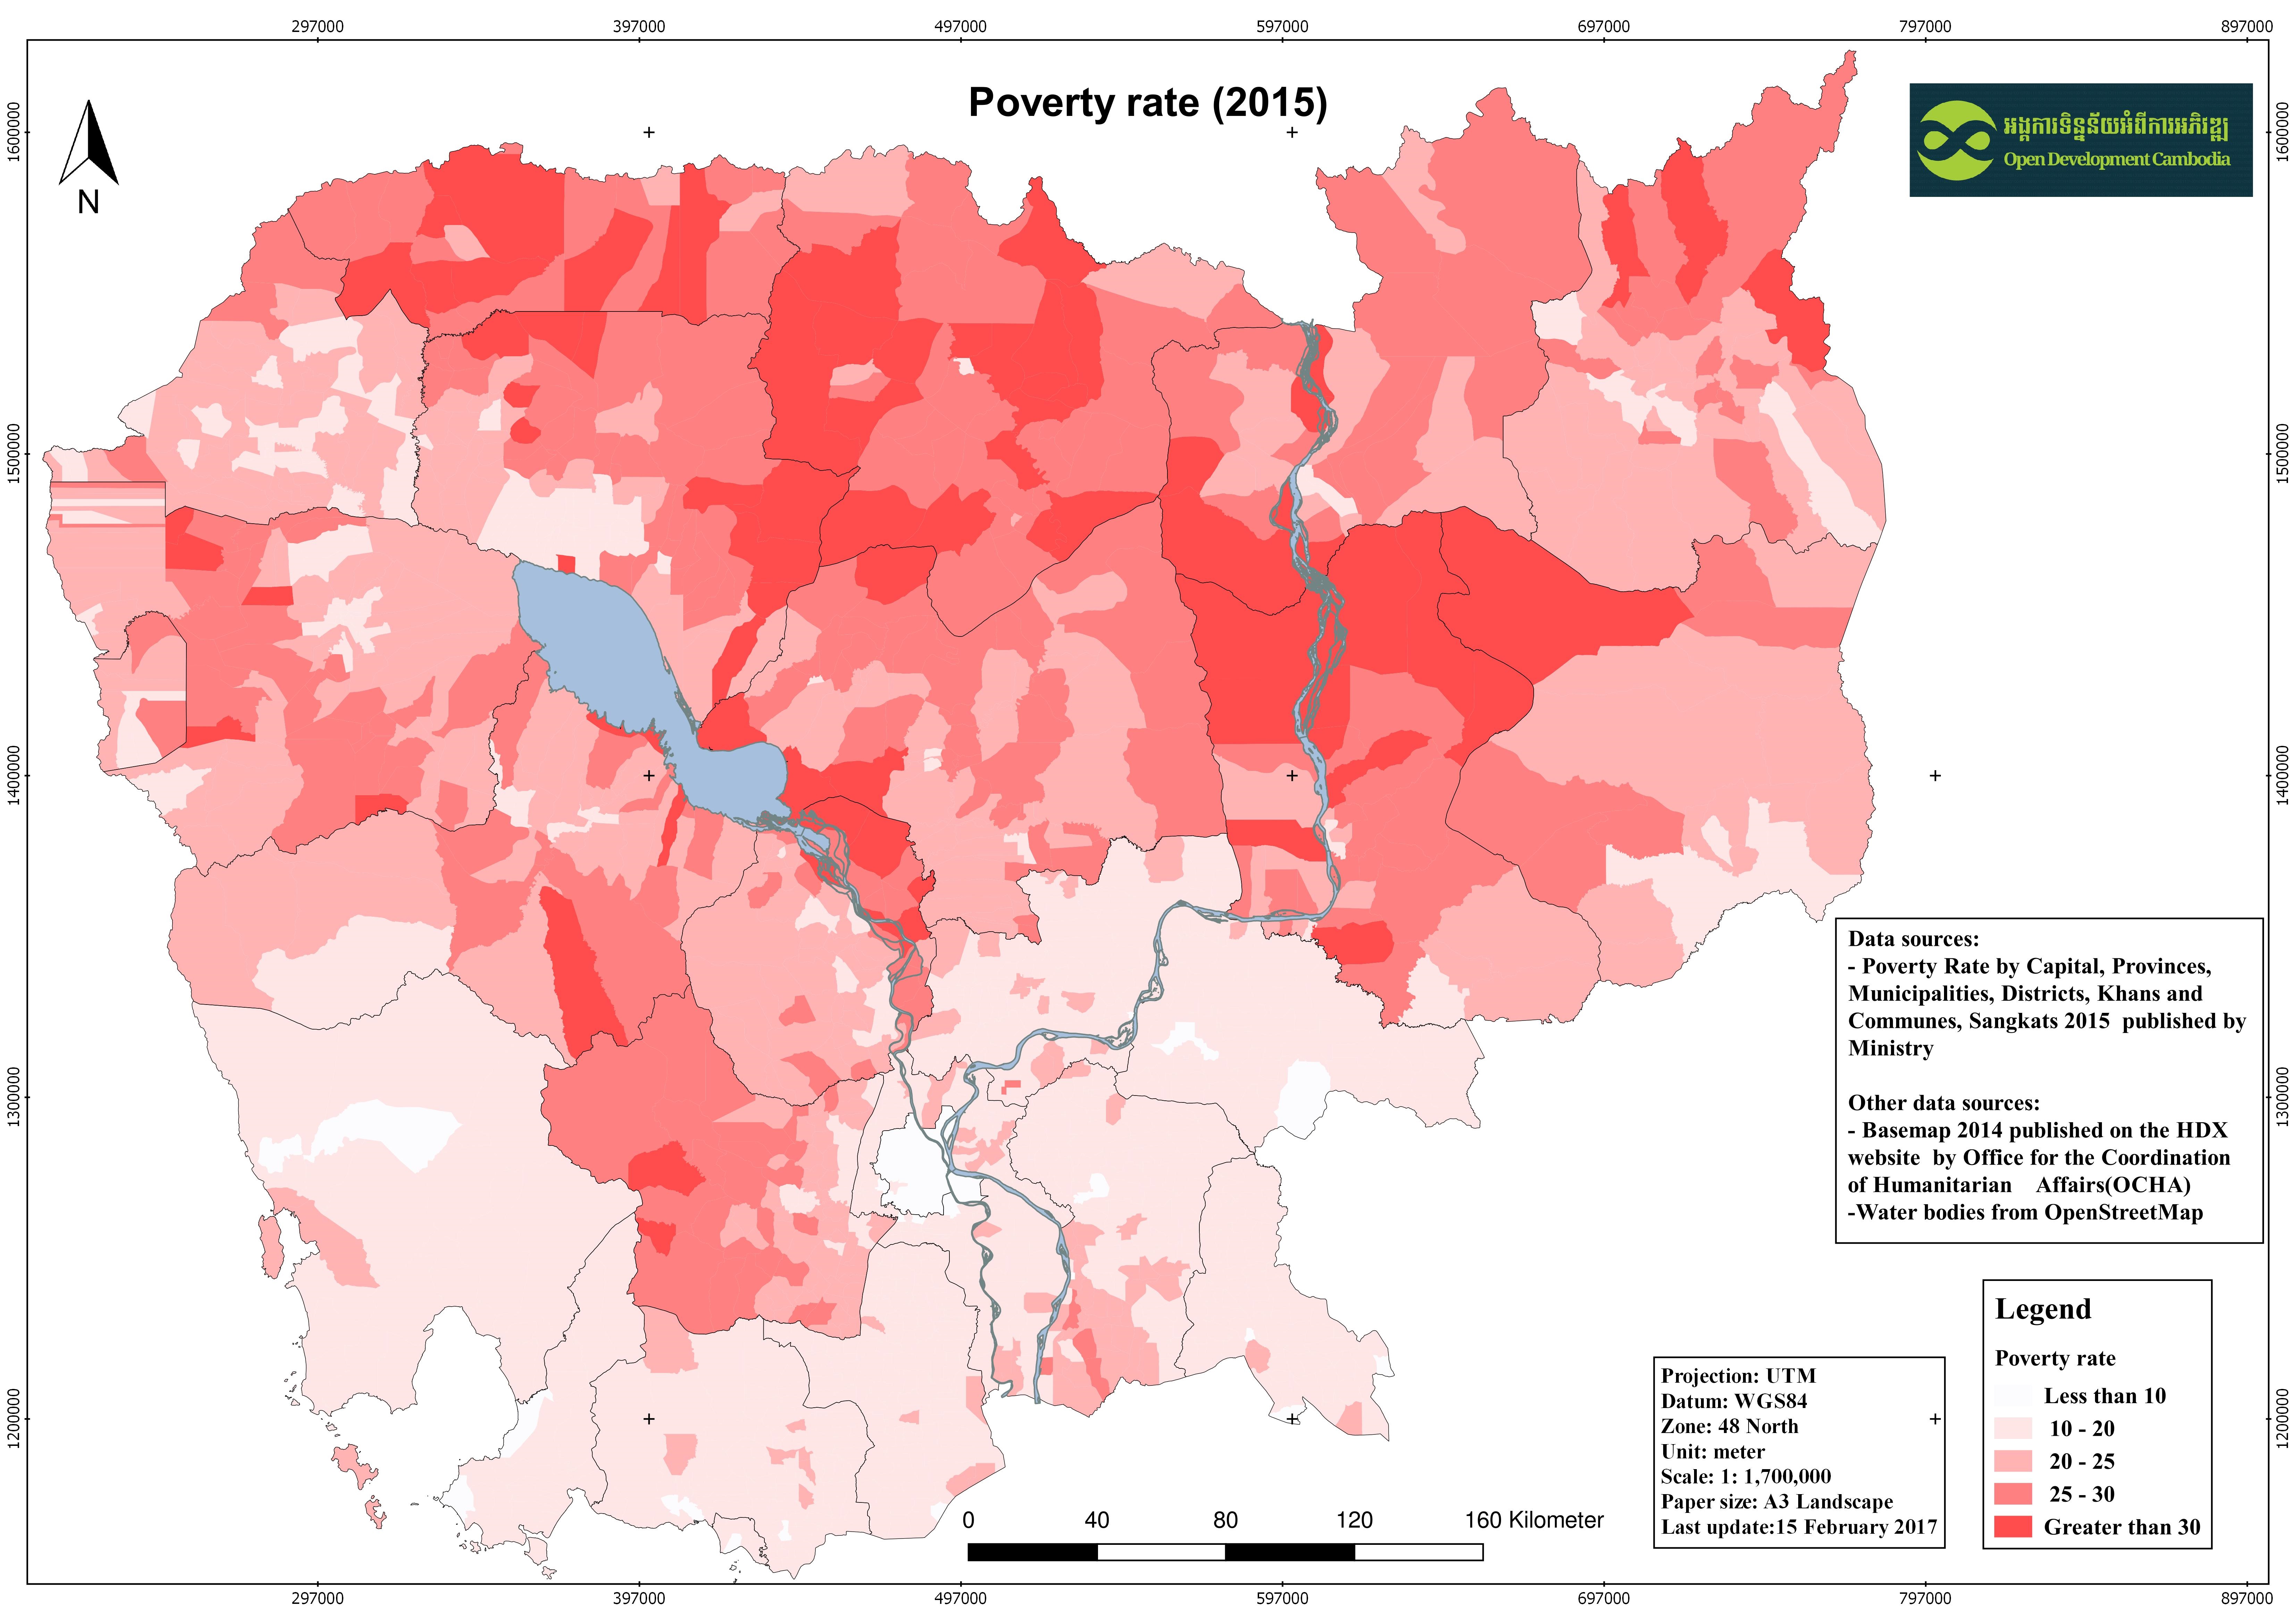 2015 map of poverty rates in Cambodia.